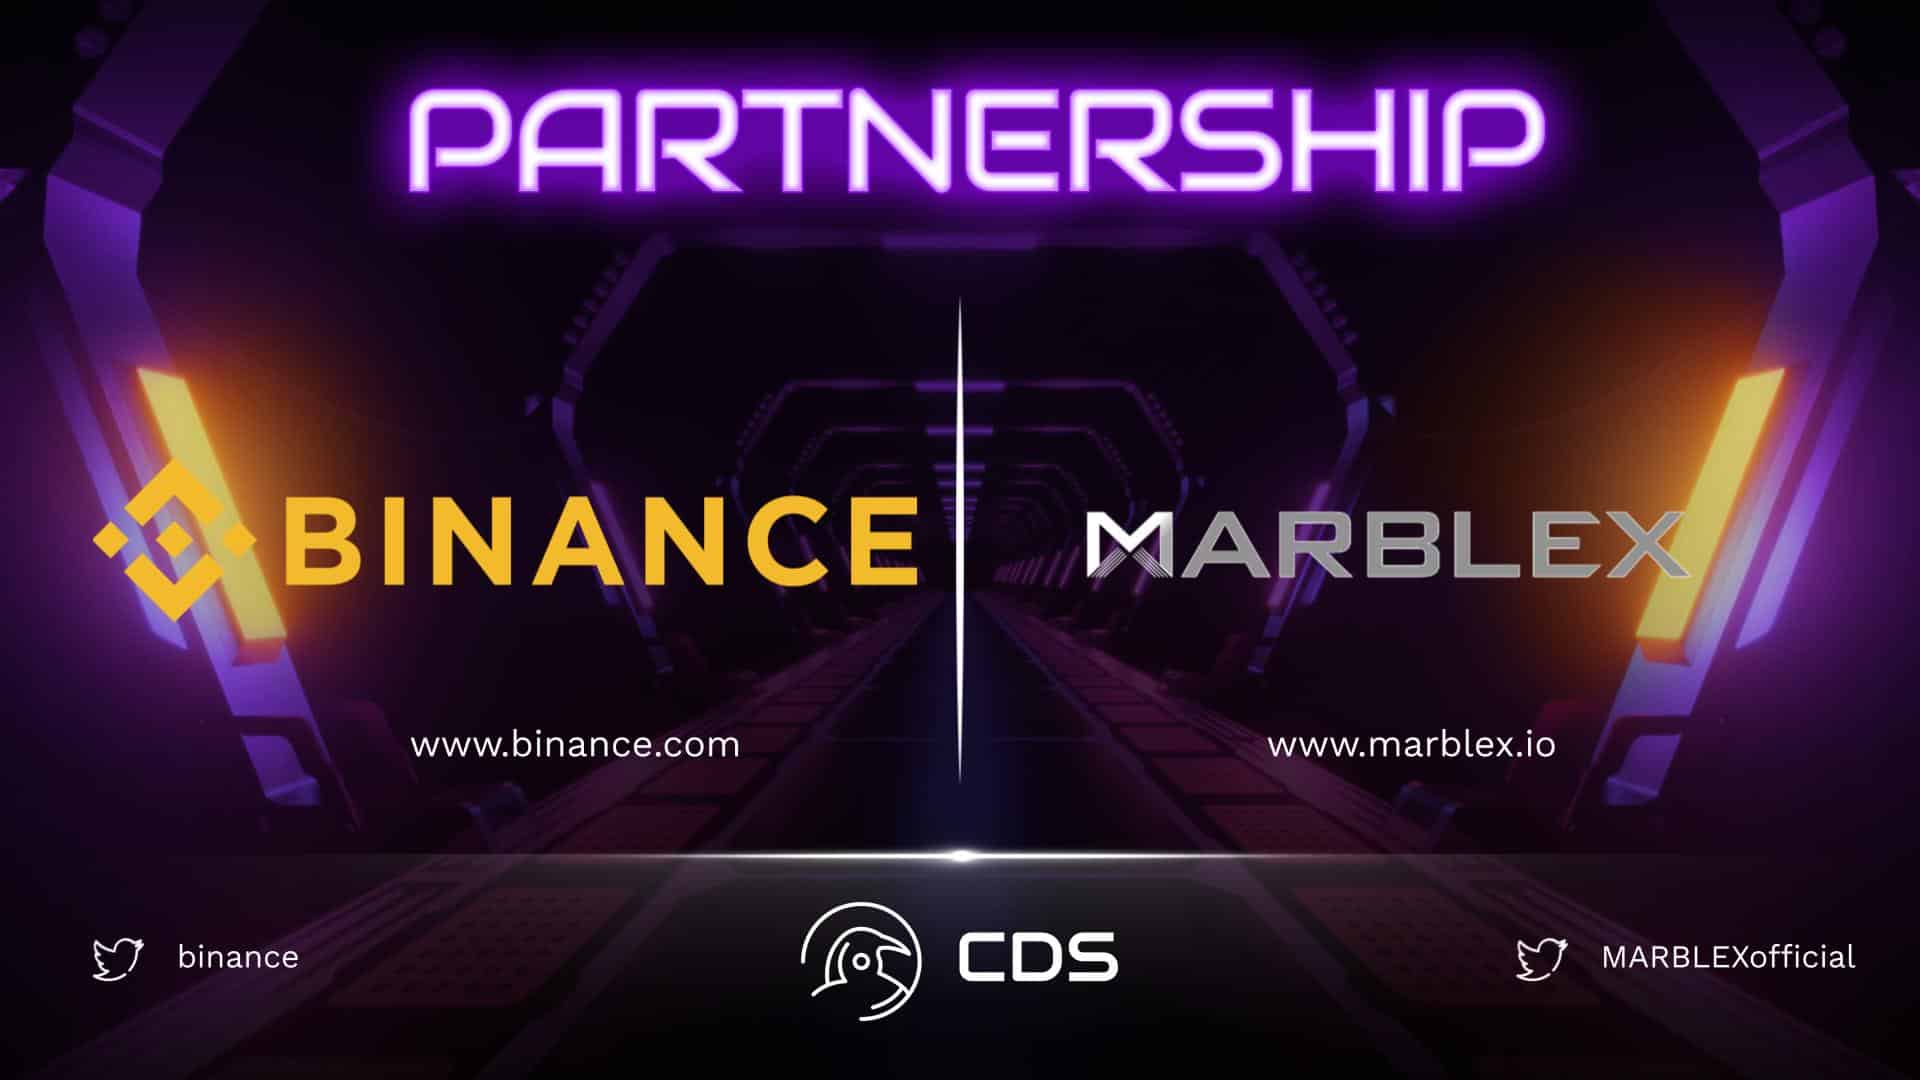 Marblex and Binance Form a Strategic Partnership to Expand Blockchain Infrastructure